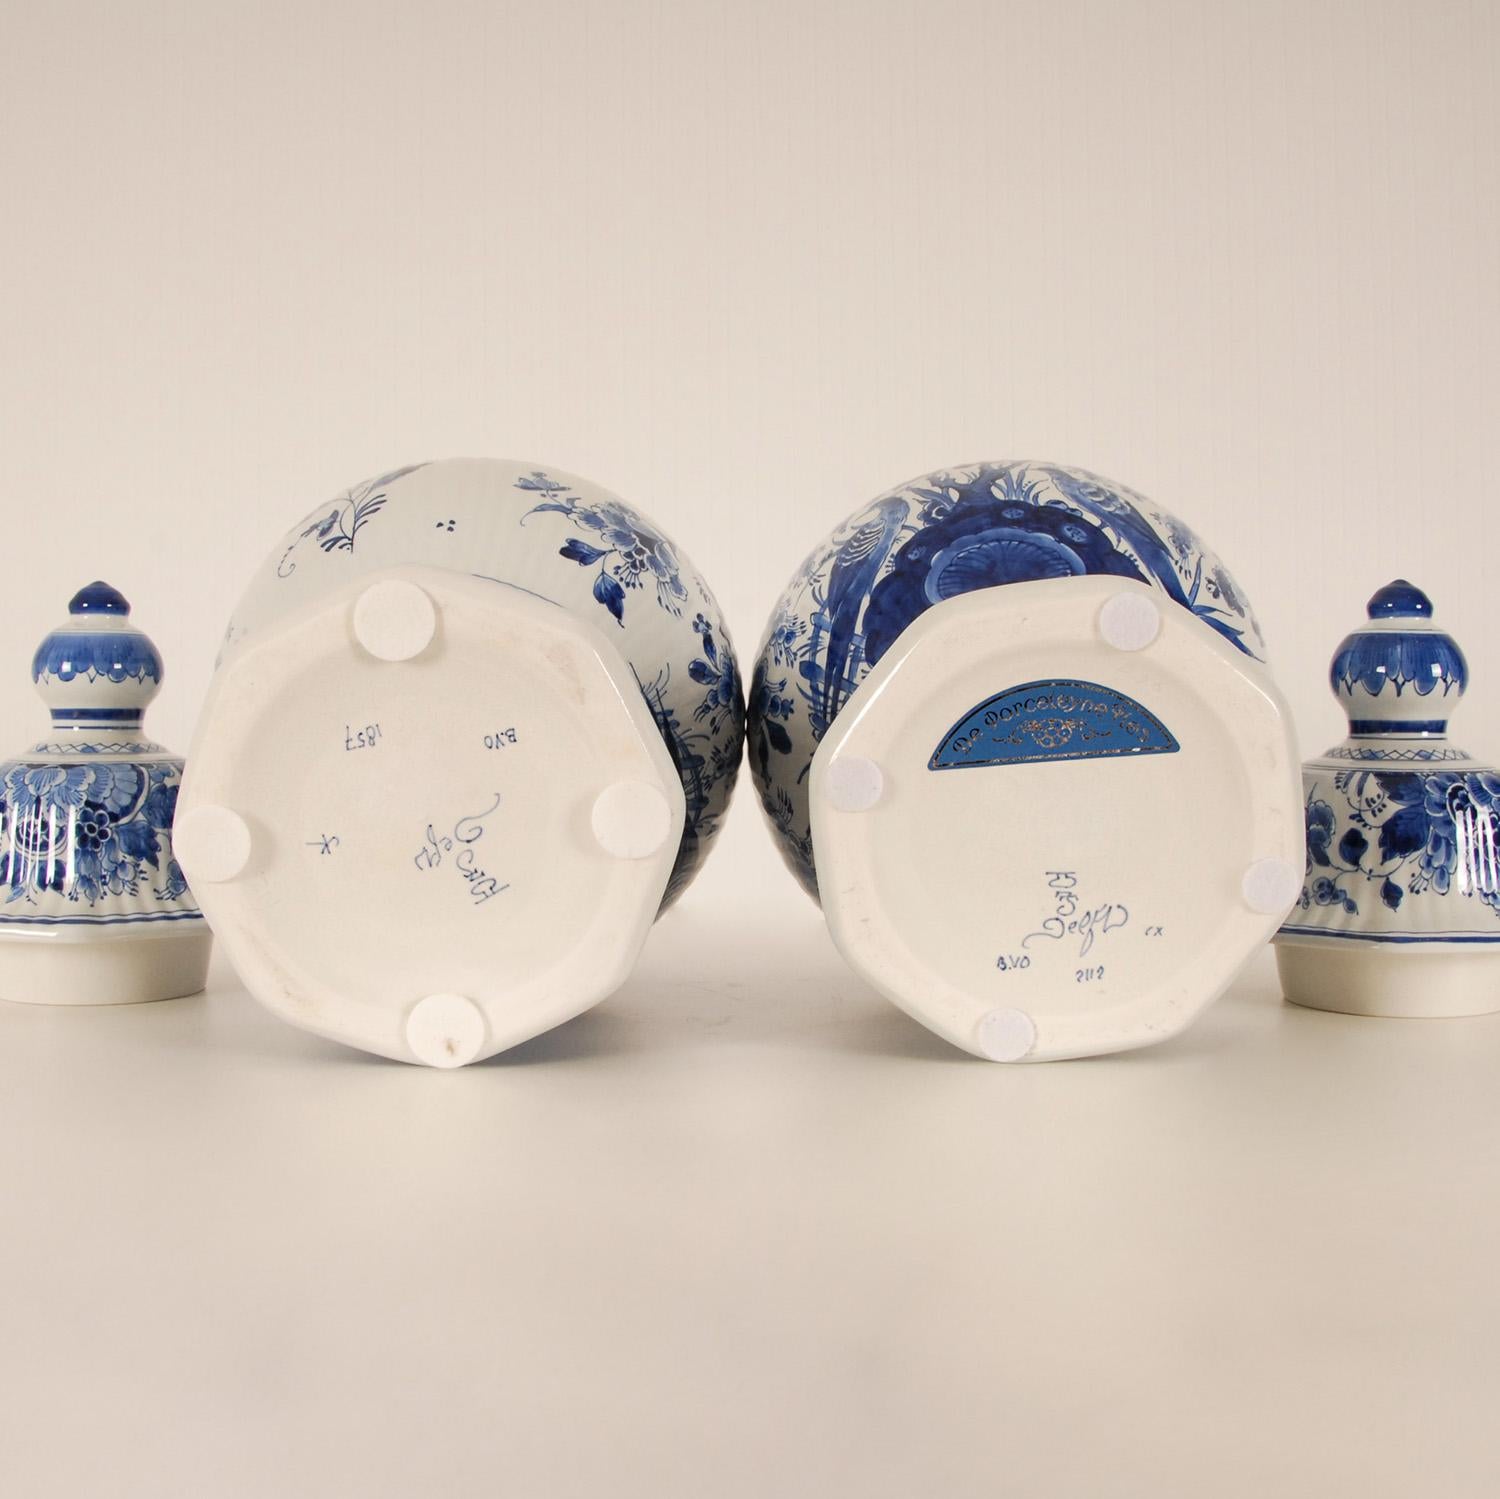 20th Century Royal Delft Baluster Vases Earthenware Blue White Ceramic Covered Jars -  a pair For Sale